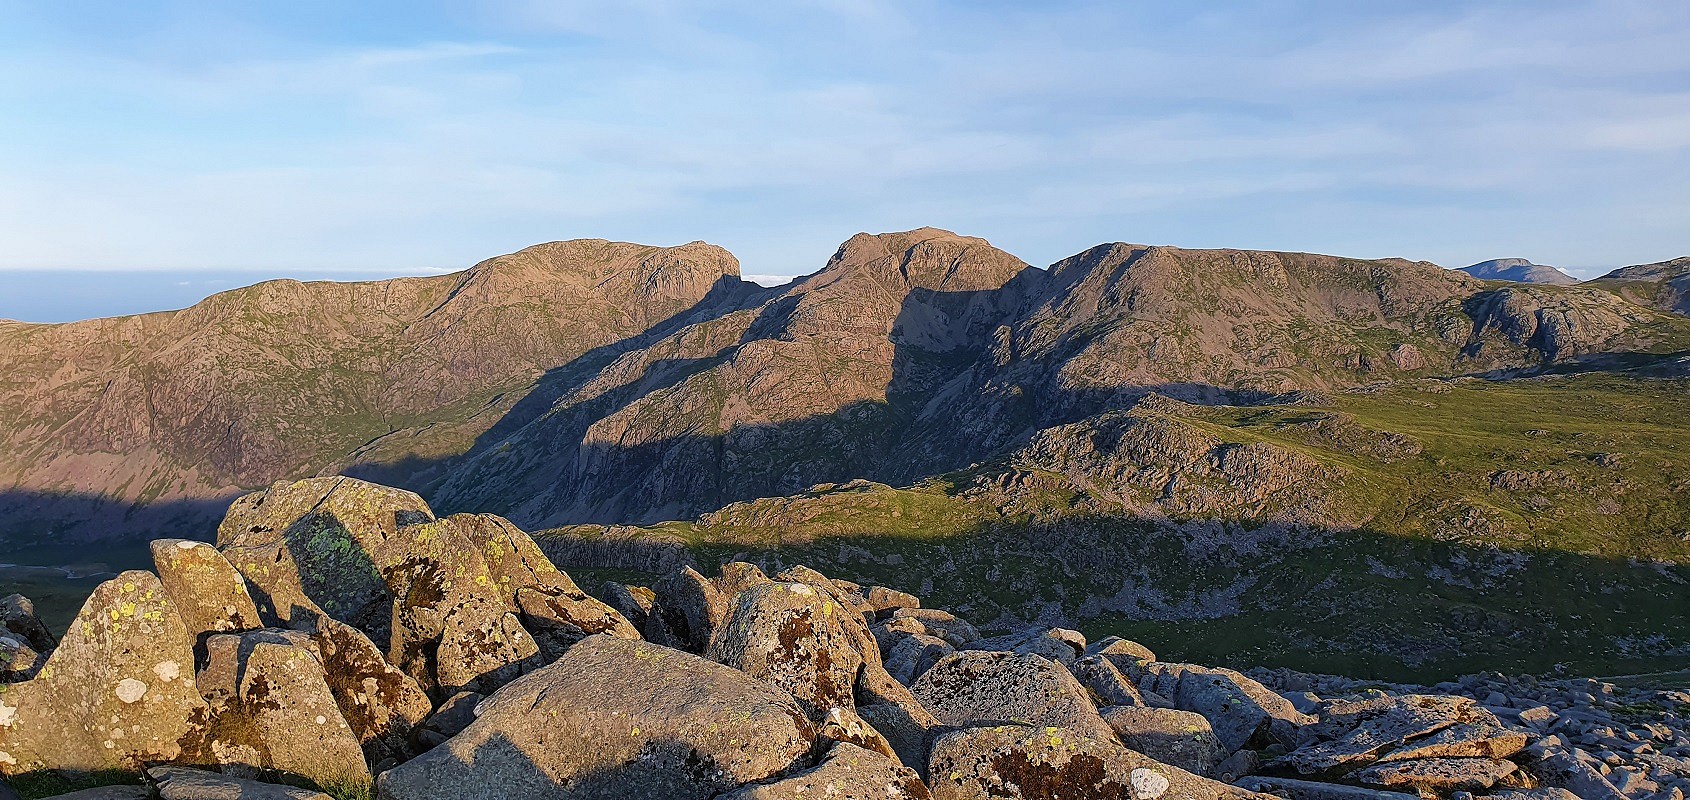 The benefits of an early start: Scafells from Bowfell, 6:20am  © Norman Hadley